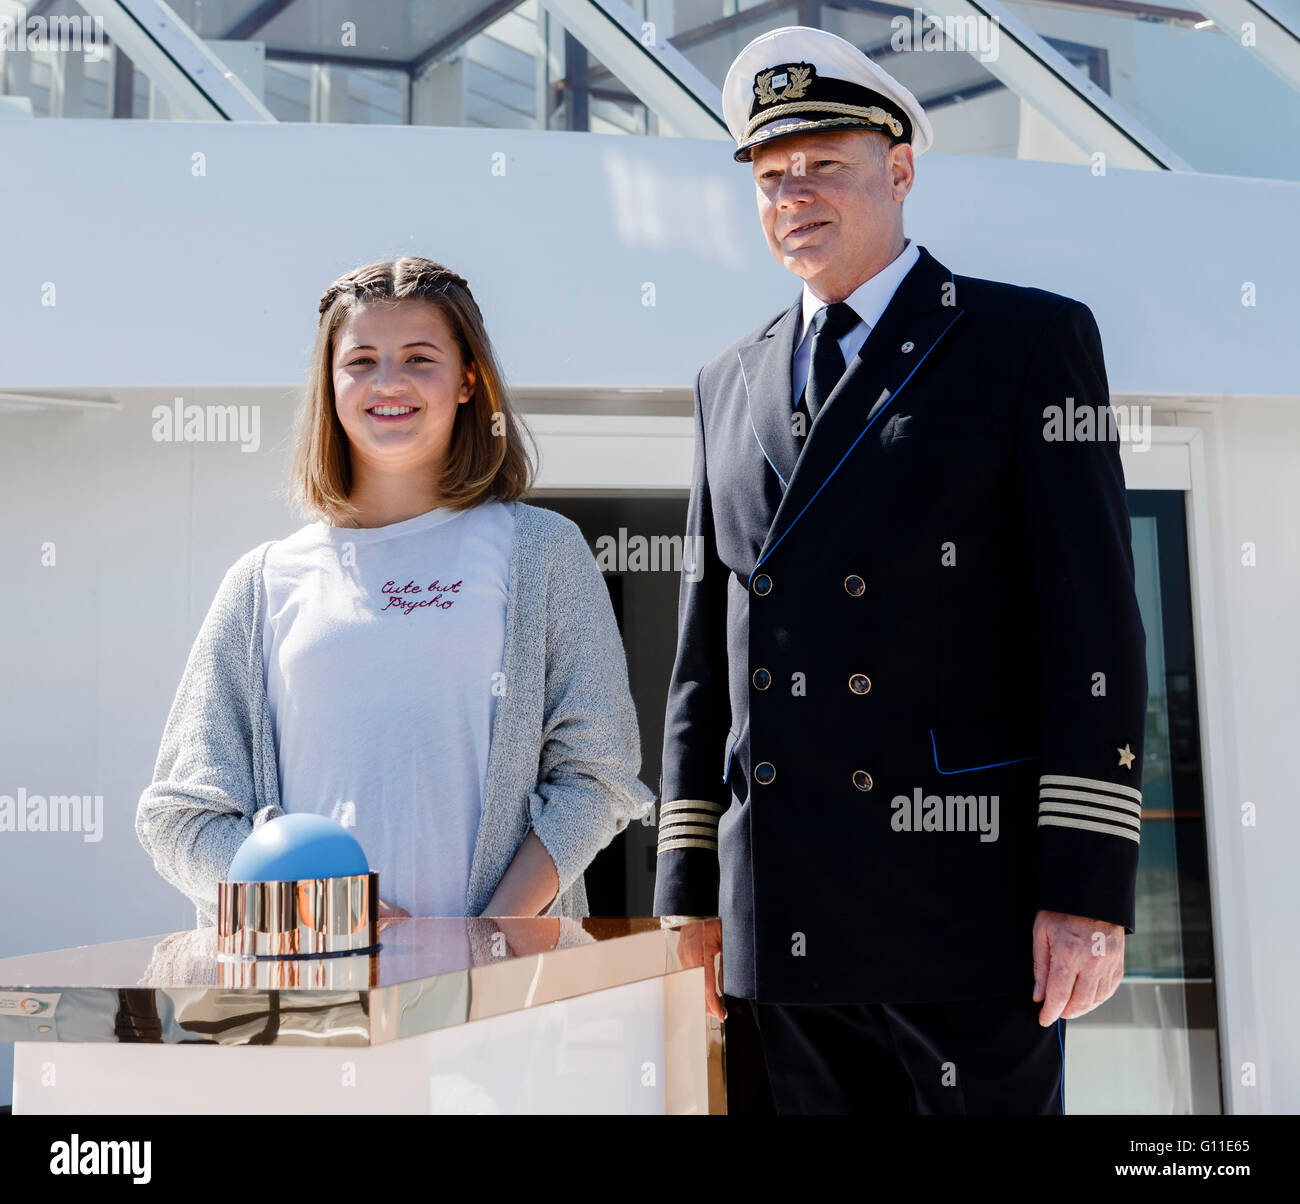 Emma Schweiger, daughter of Till Schweiger, und Detlev Harms, captain of the AIDAprima, pose on board the ship Hamburg, Germany, 07 May 2016. The young actress will christen the ship during the 827th Port Anniversary this evening. Photo: MARKUS SCHOLZ/dpa Stock Photo